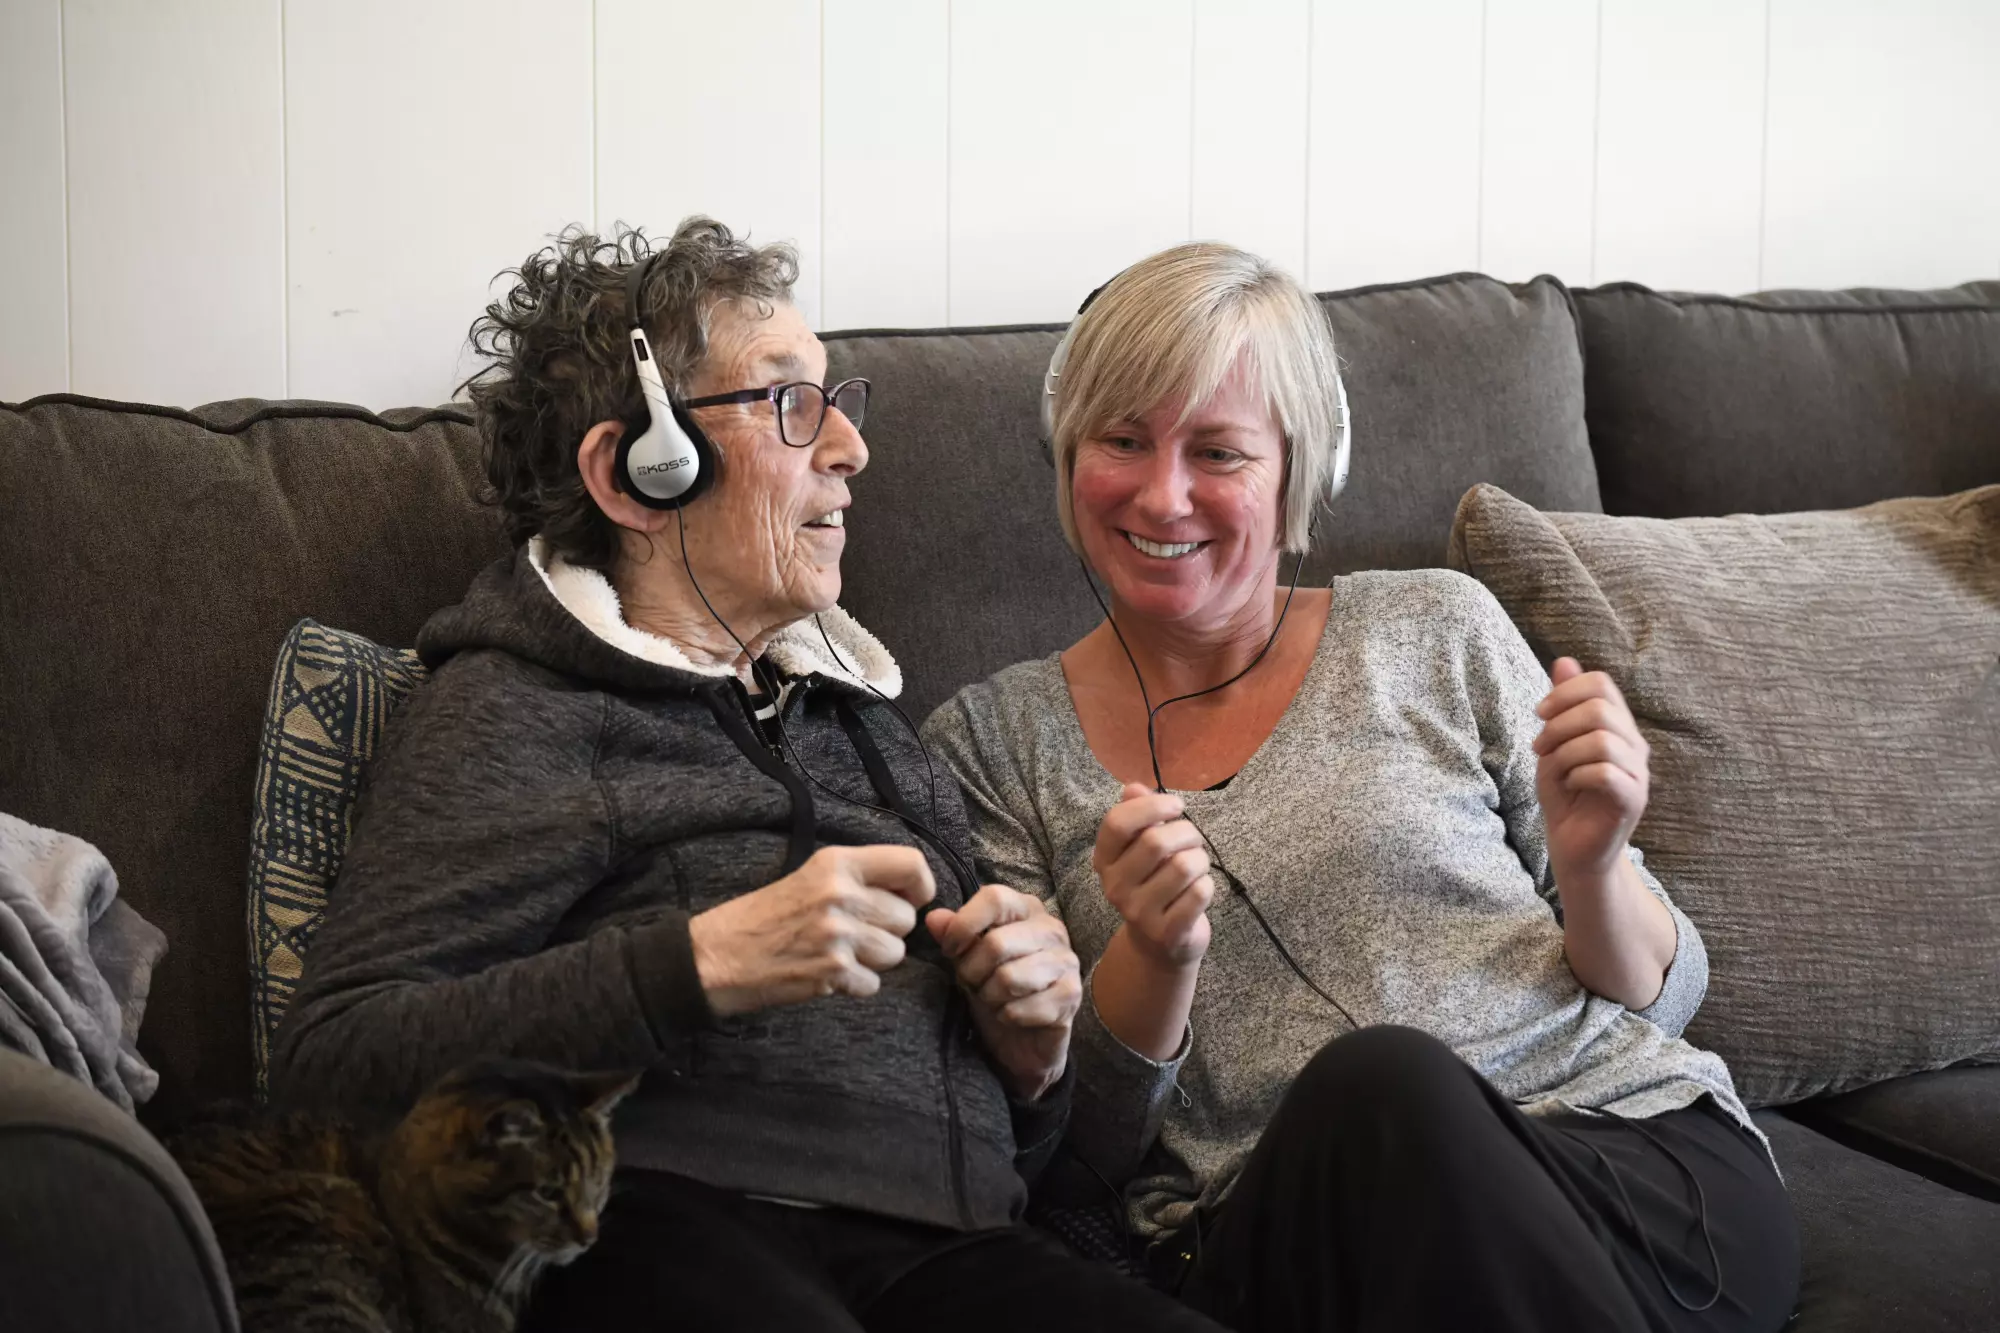 The San Diego Union-Tribune: ‘Music is in our souls’: Therapy improves mood and cognition for people with Alzheimer’s